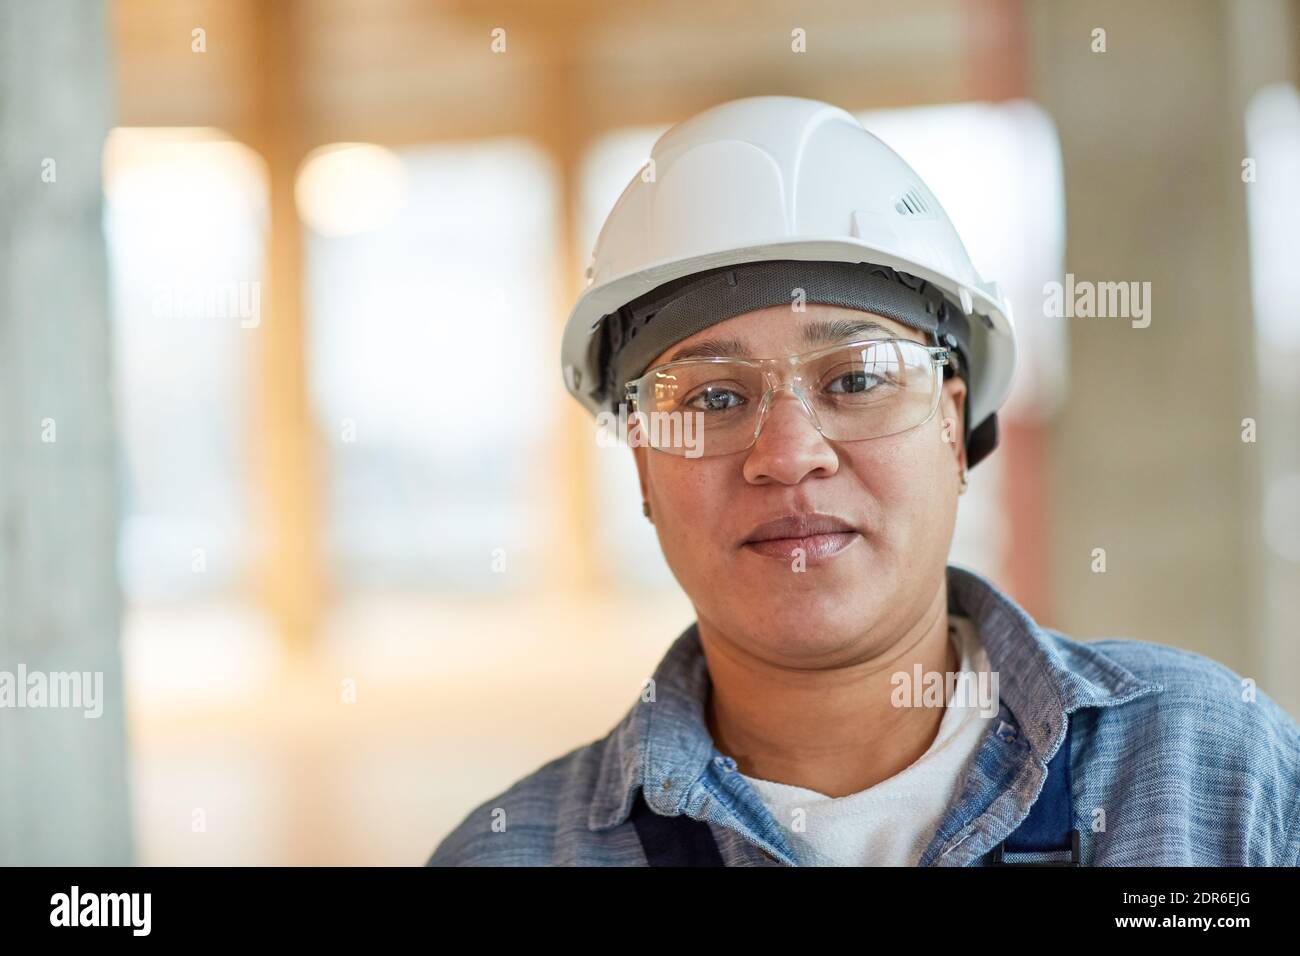 Front view portrait of female worker wearing hardhat and looking at camera while standing on construction site, copy space Stock Photo